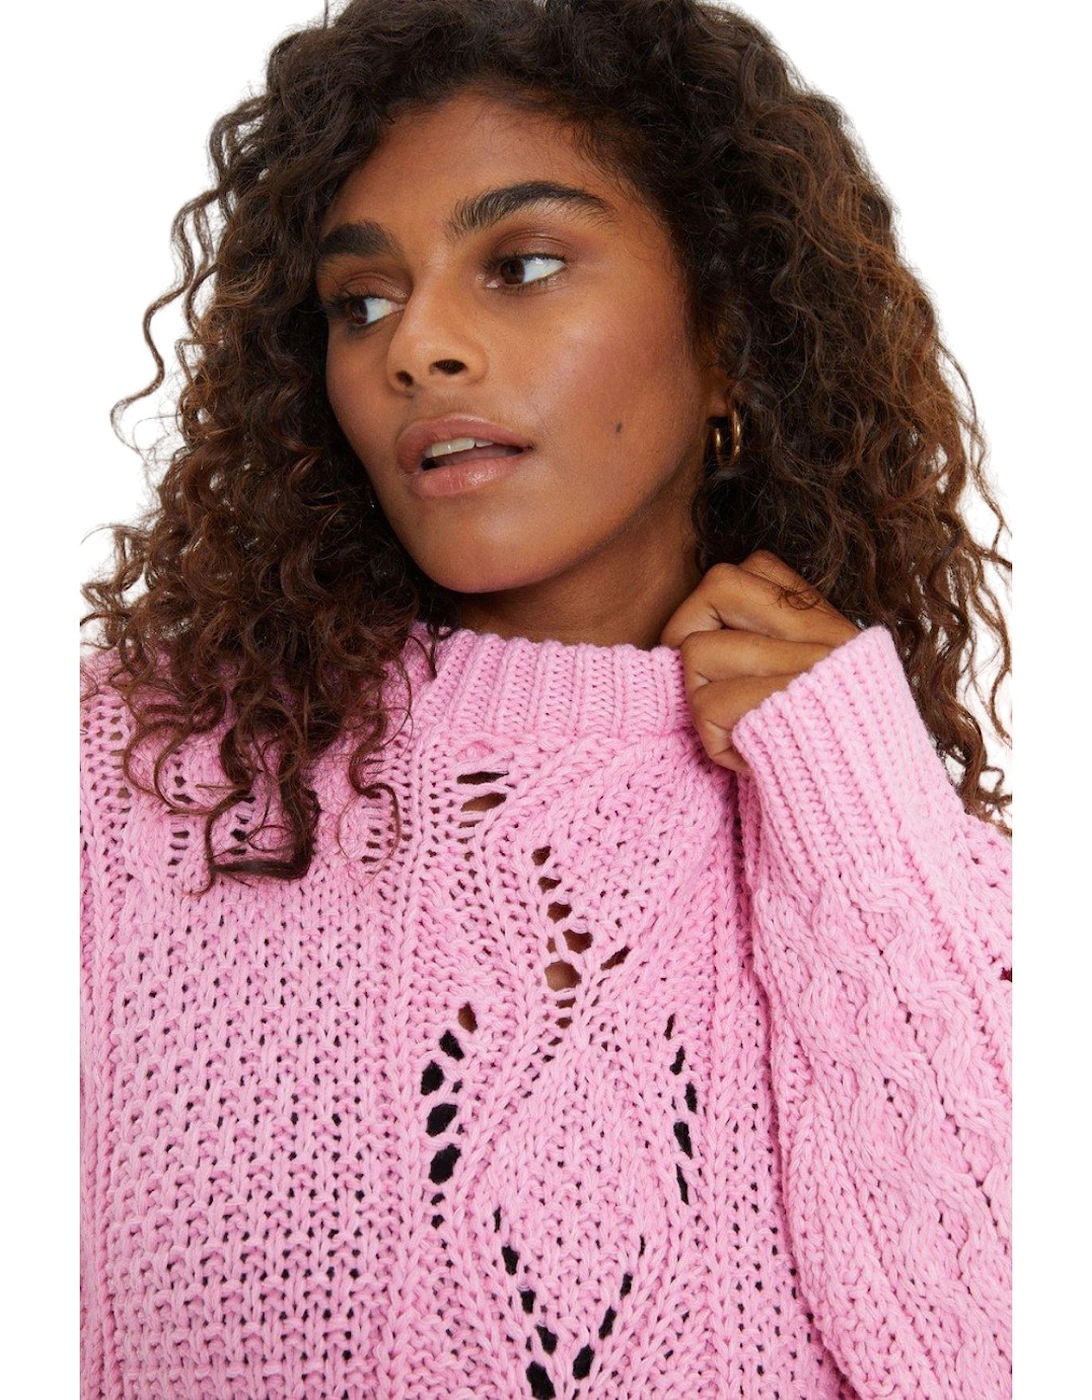 Womens/Ladies Cable Chunky Knit Crew Neck Jumper